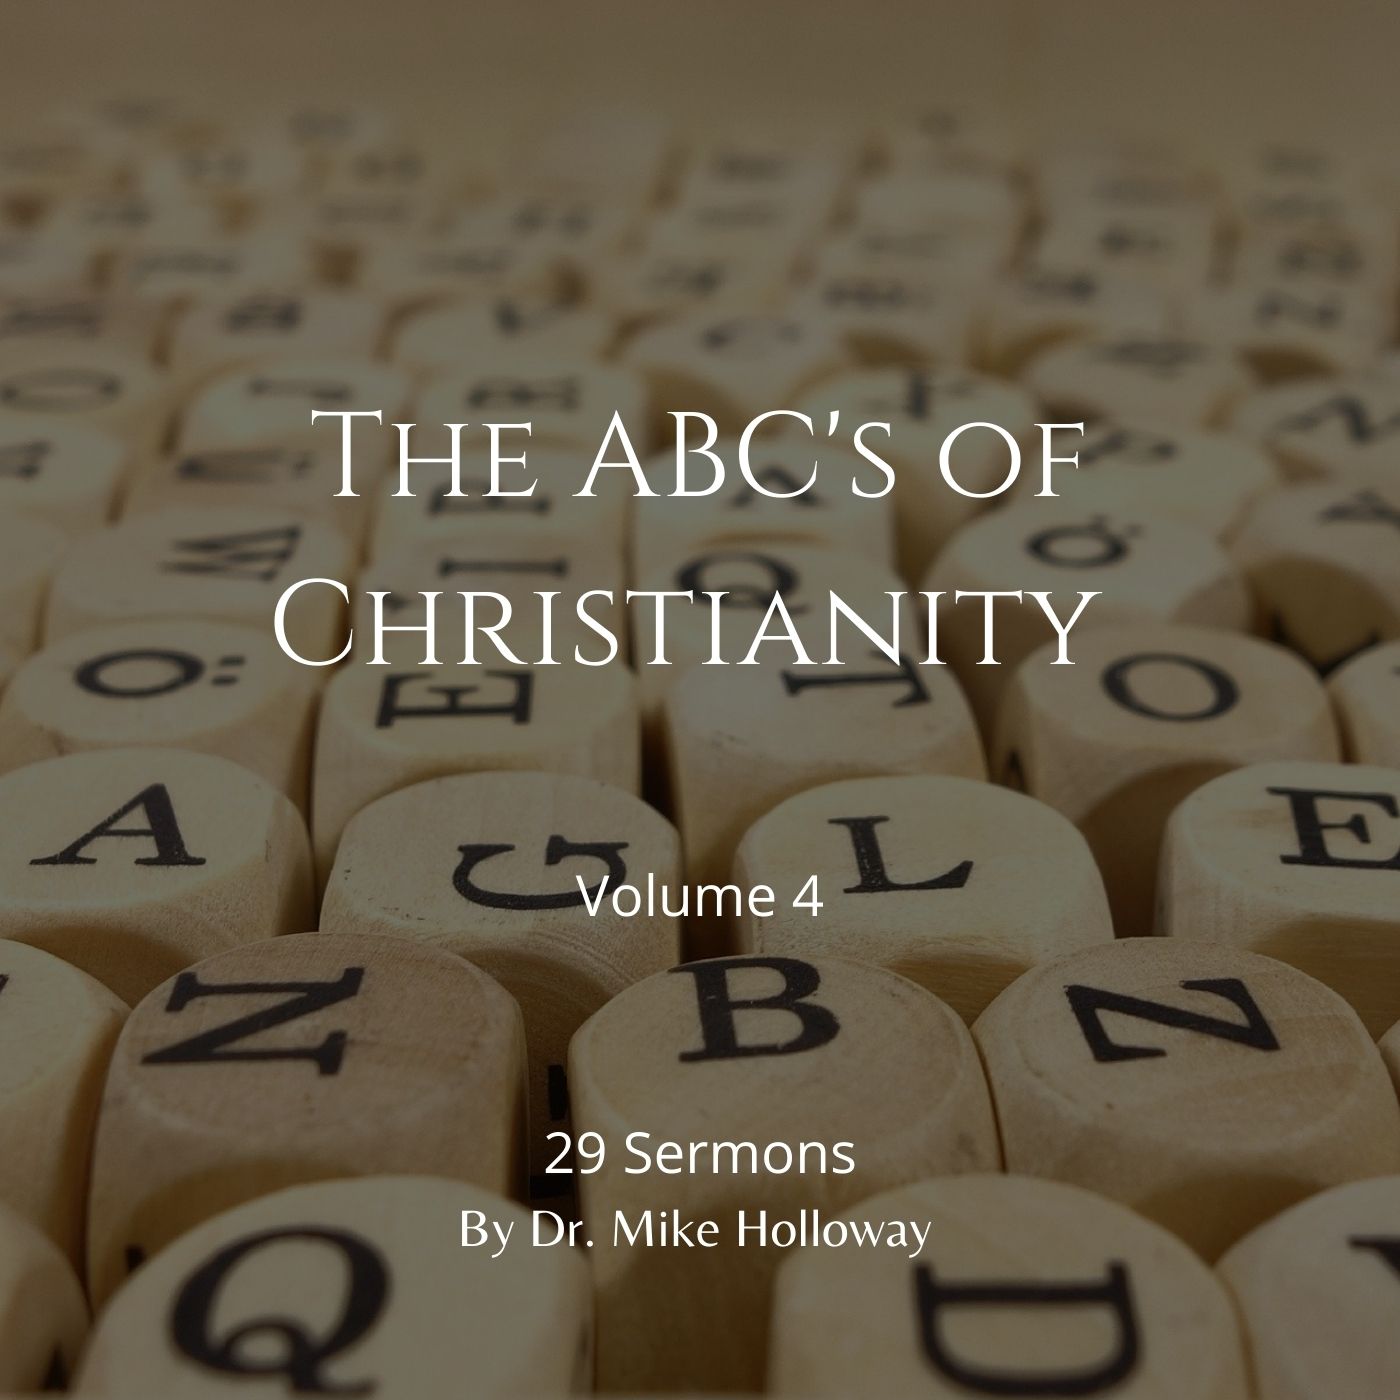 The ABC’s of Christianity – Volume 4